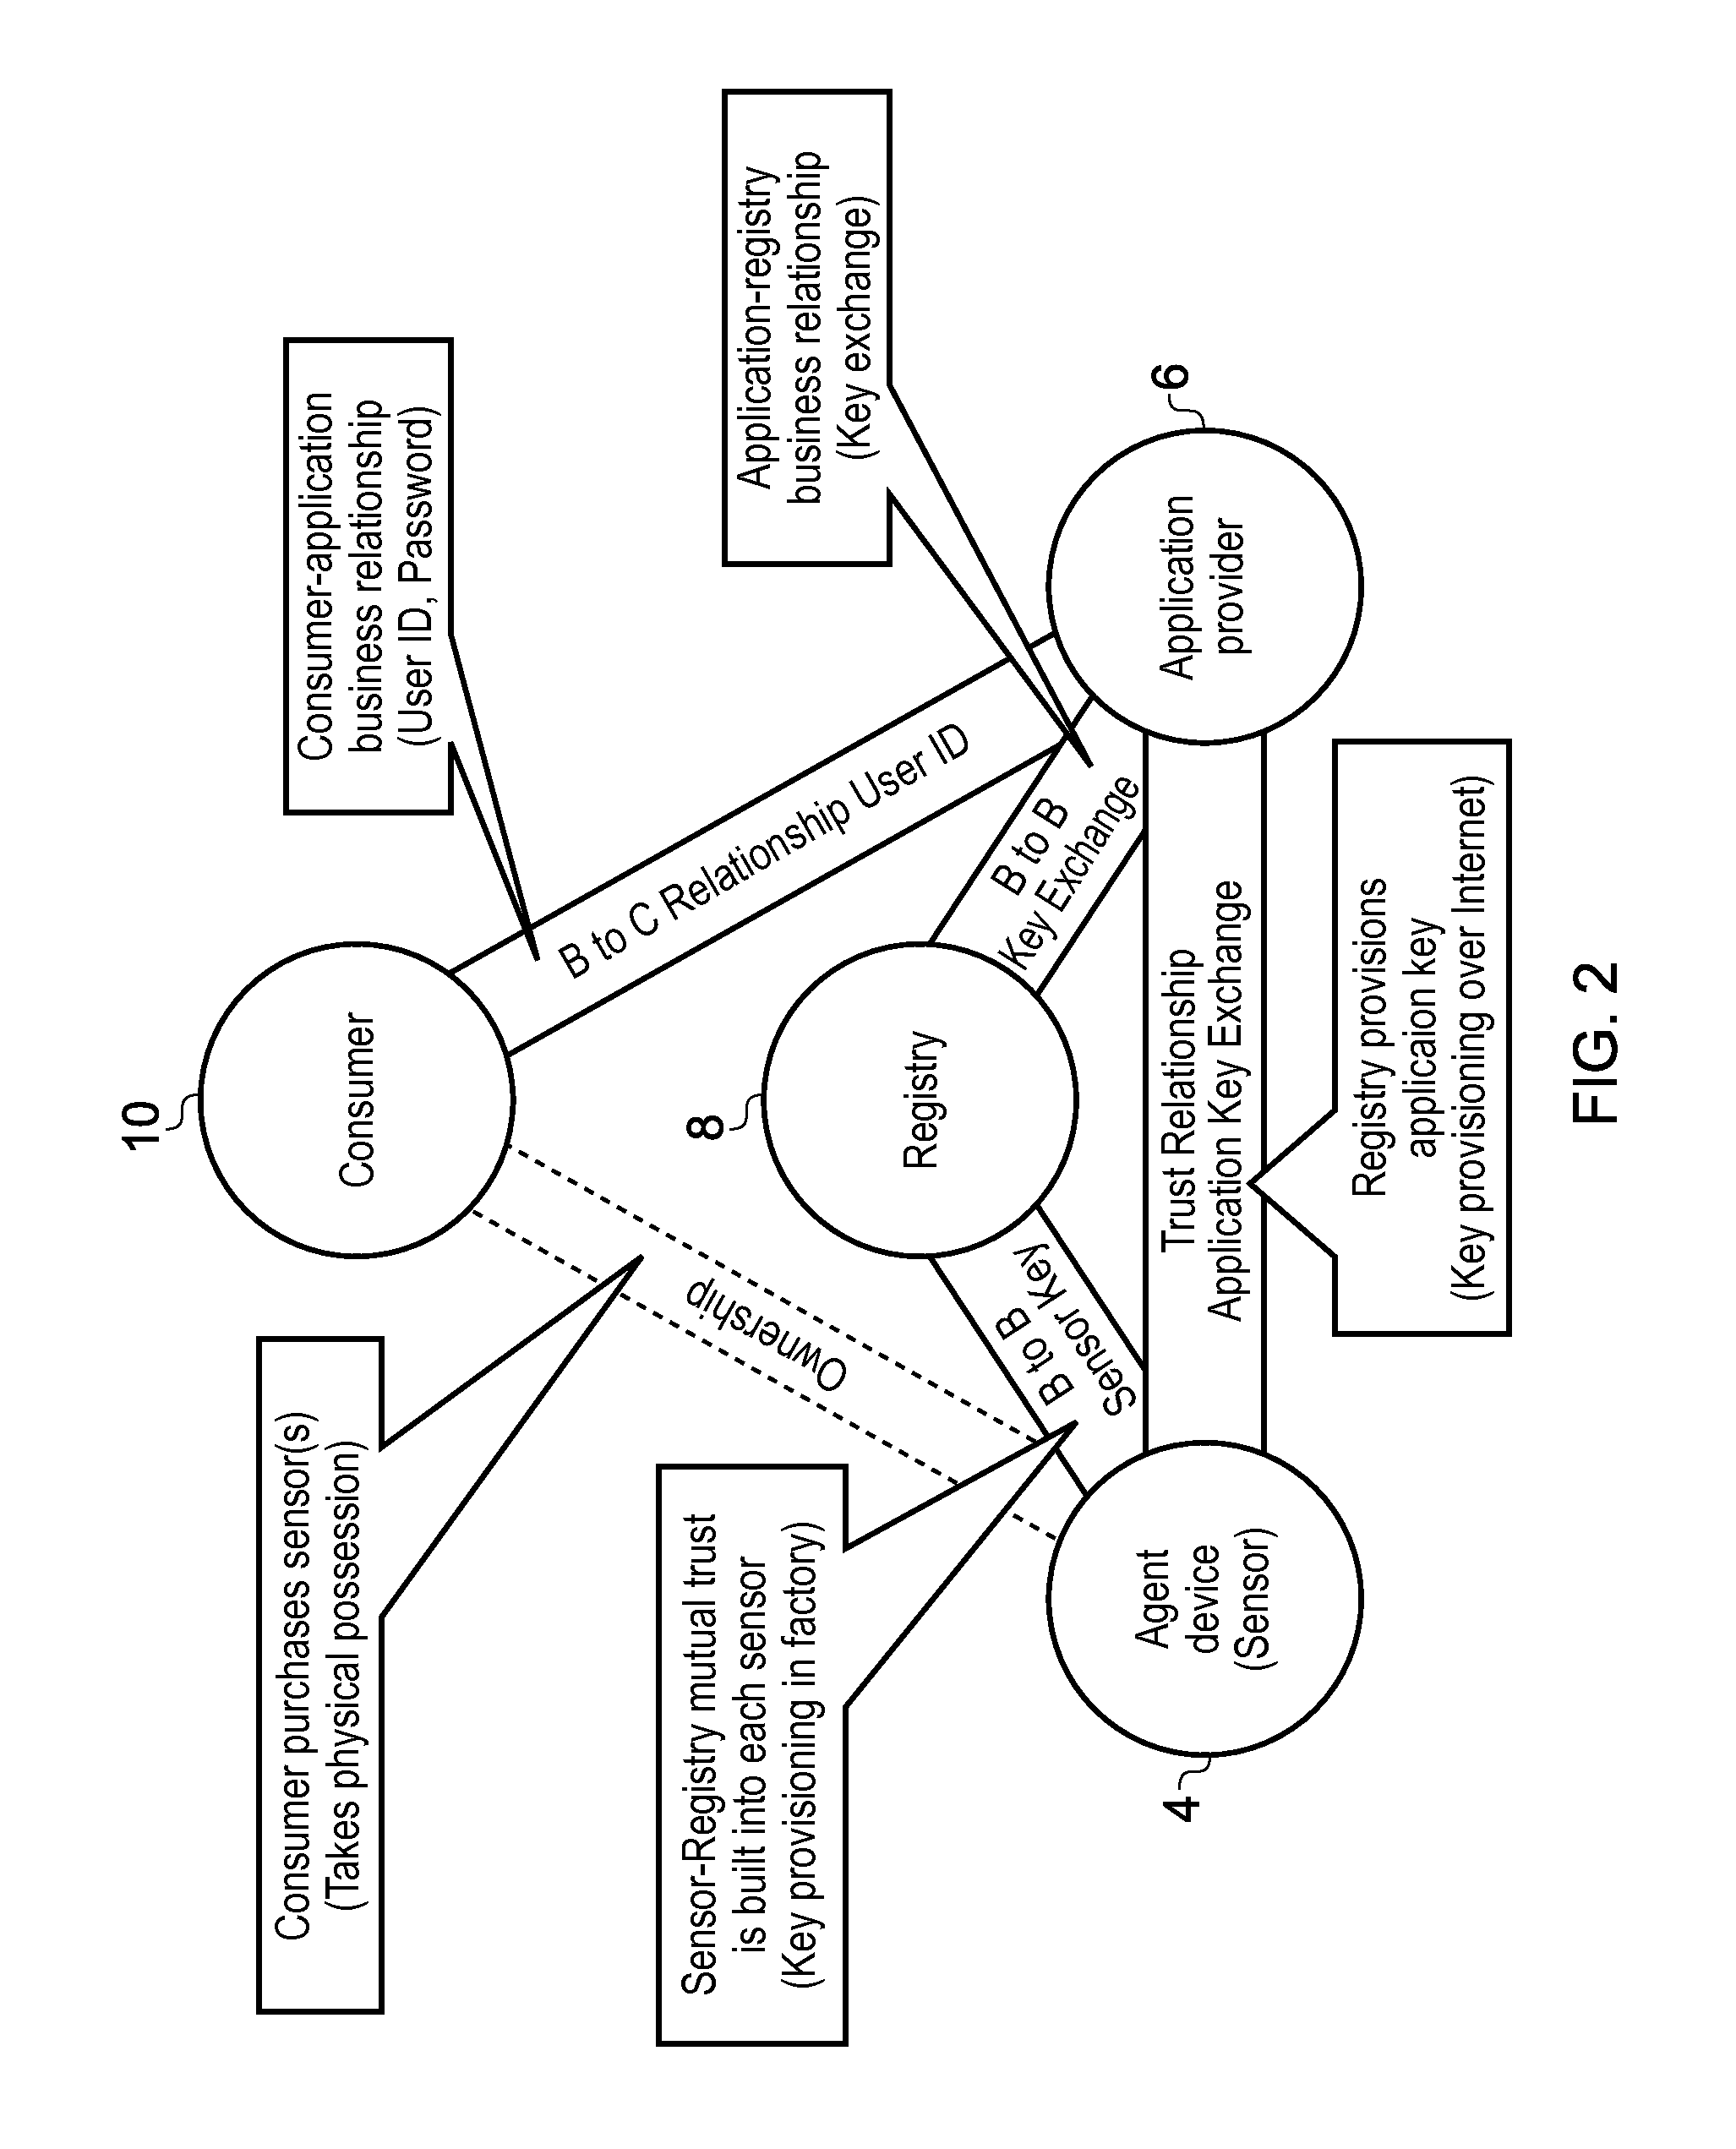 Method for assigning an agent device from a first device registry to a second device registry